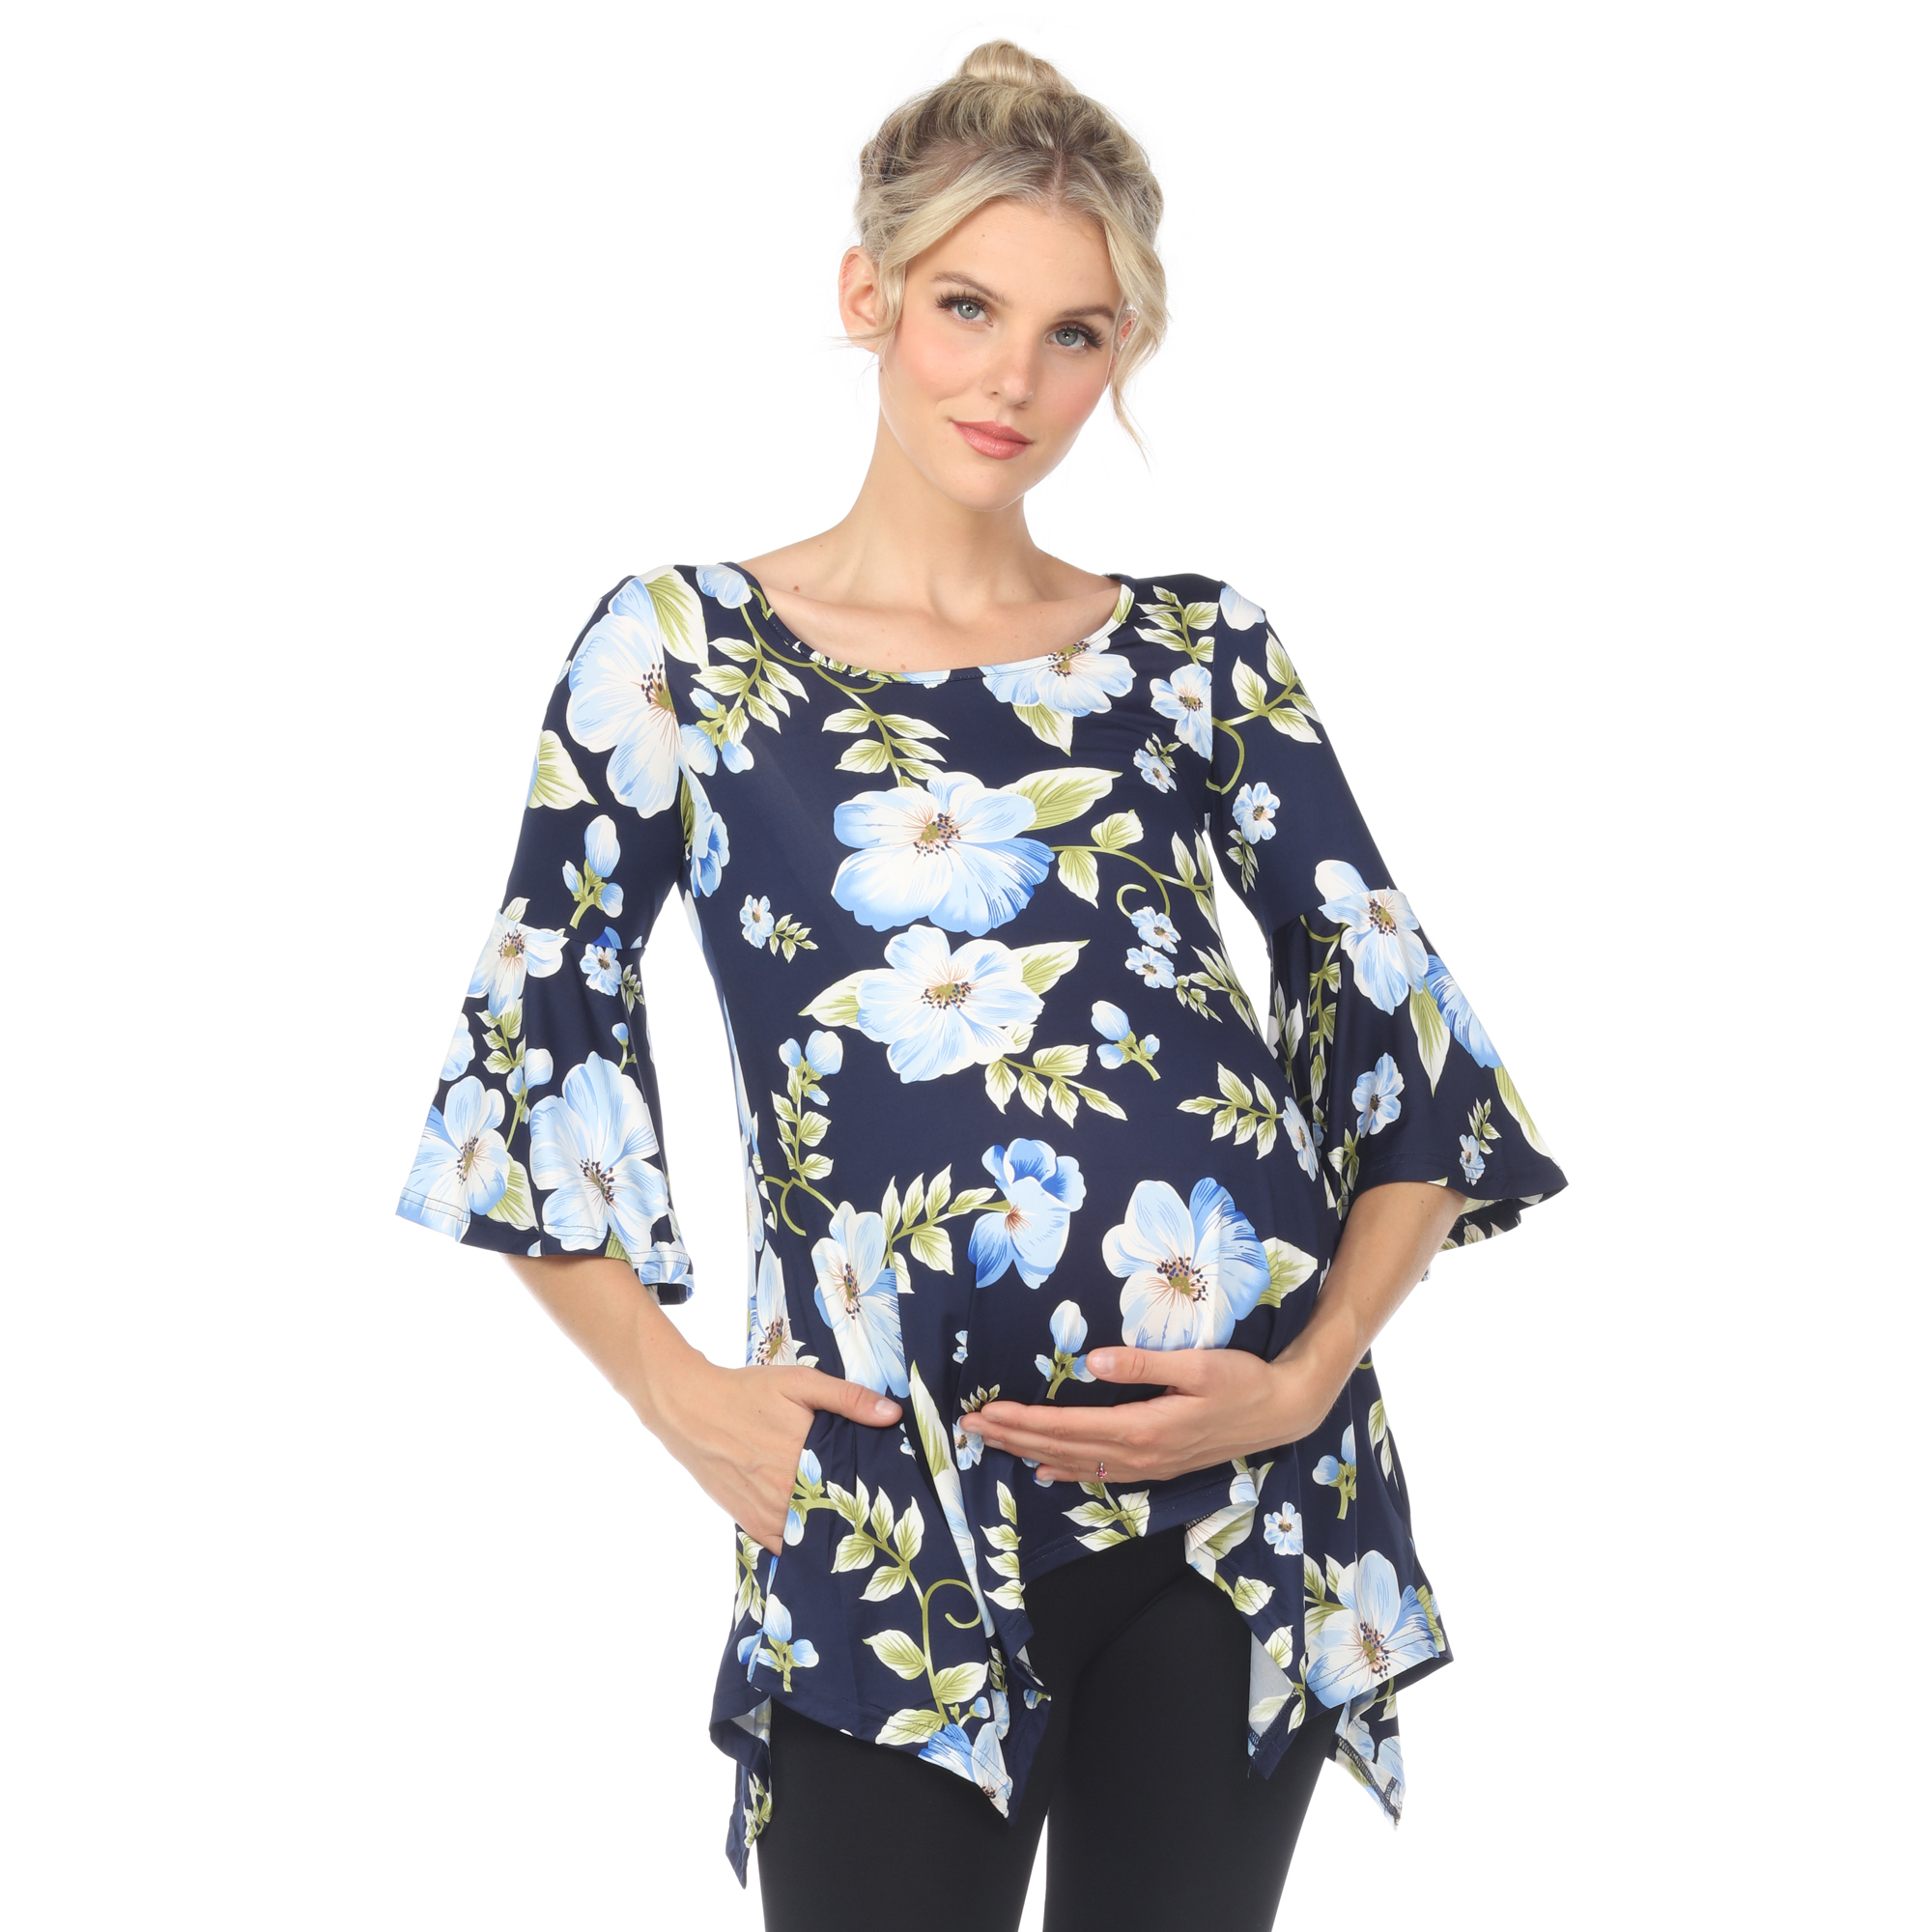 White Mark Women's Maternity Floral Print Quarter Sleeve Tunic Top With Pockets - Blue Flower, 1X